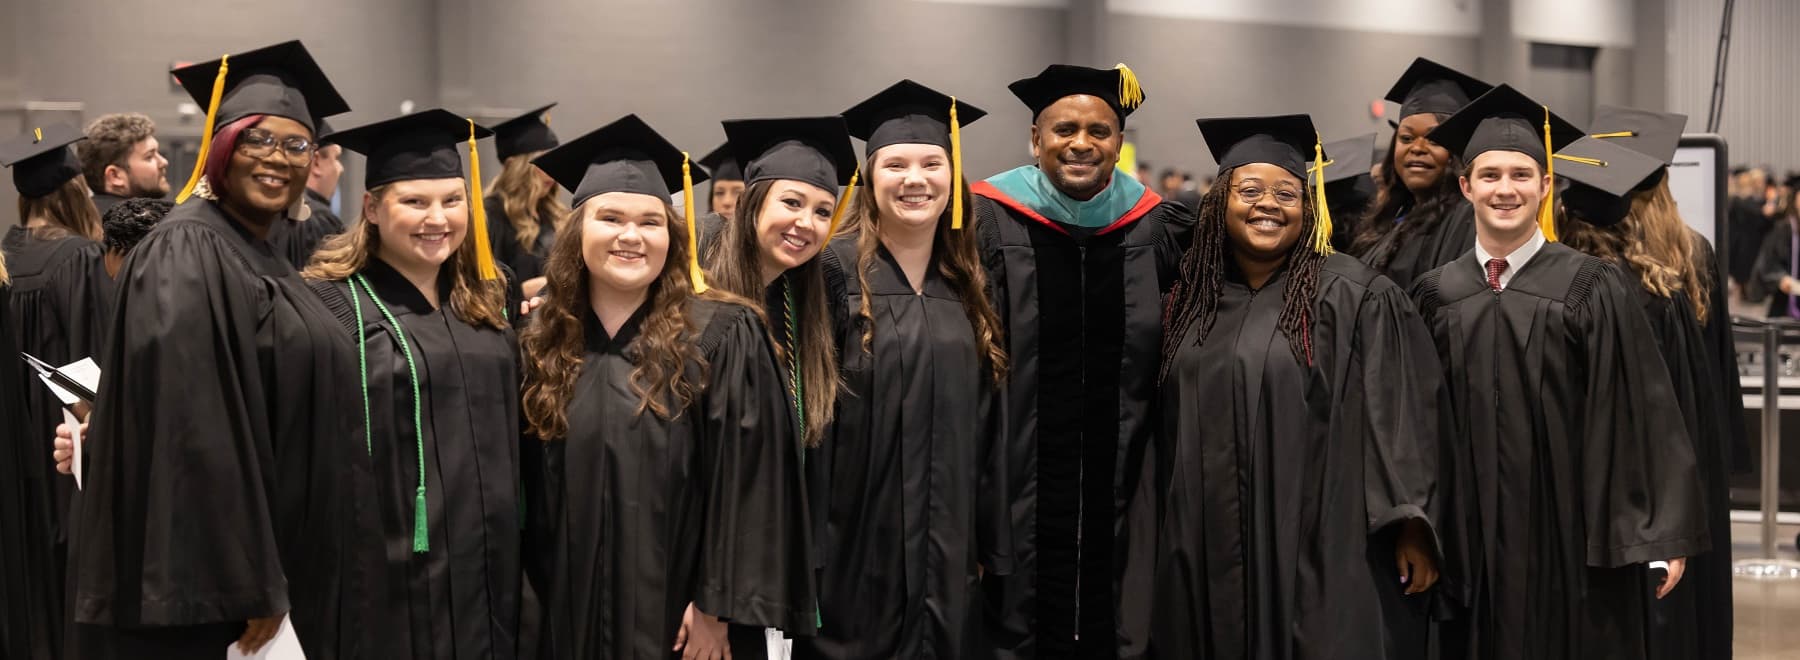 Eight UMMC Graduates pose for a photo at Commencement